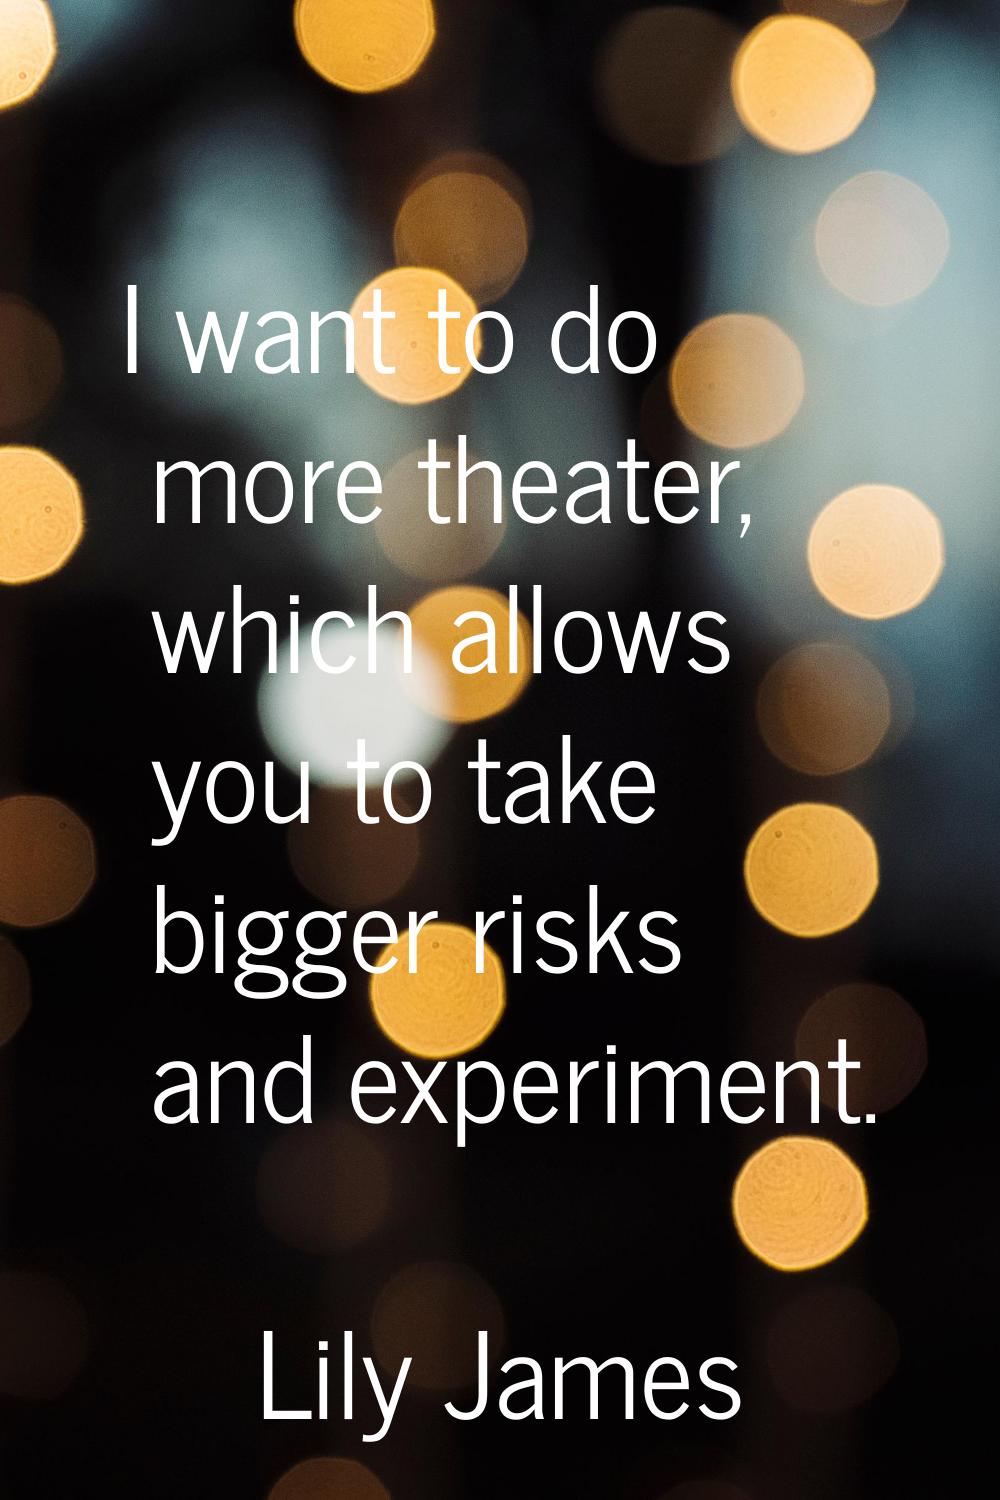 I want to do more theater, which allows you to take bigger risks and experiment.